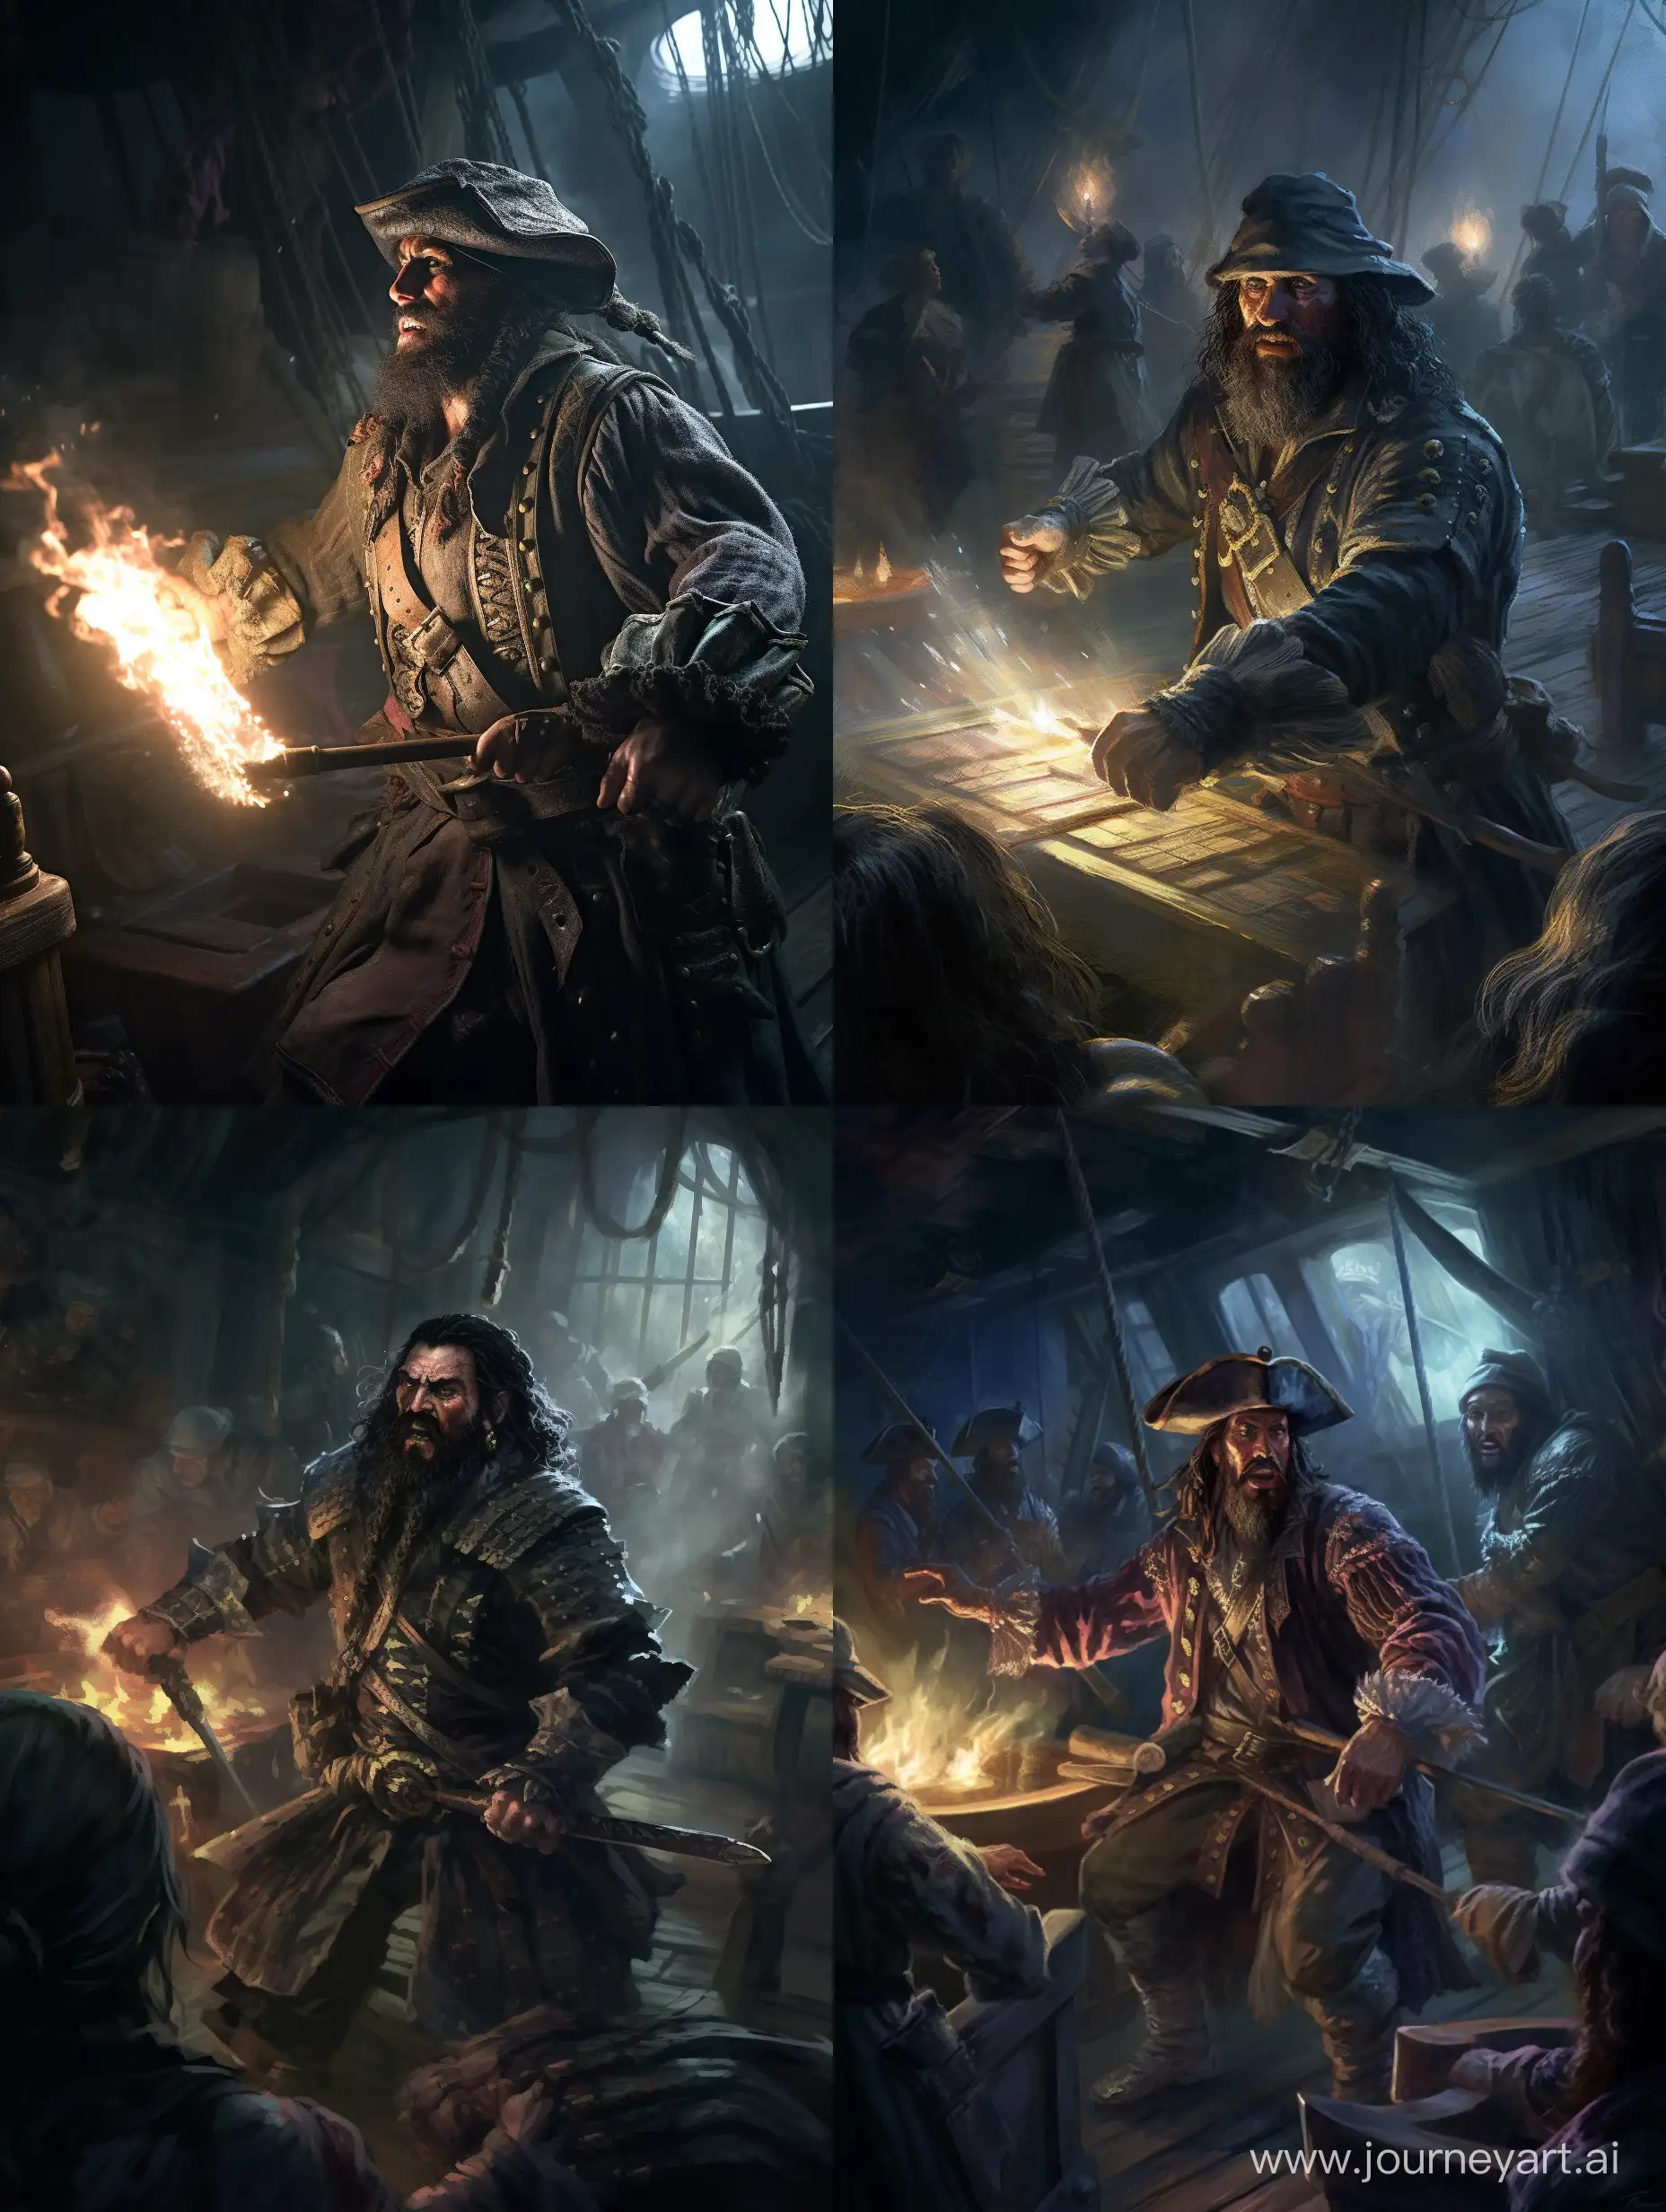 Blackbeards-Daring-Moment-Igniting-the-Battle-with-Flaming-Beard